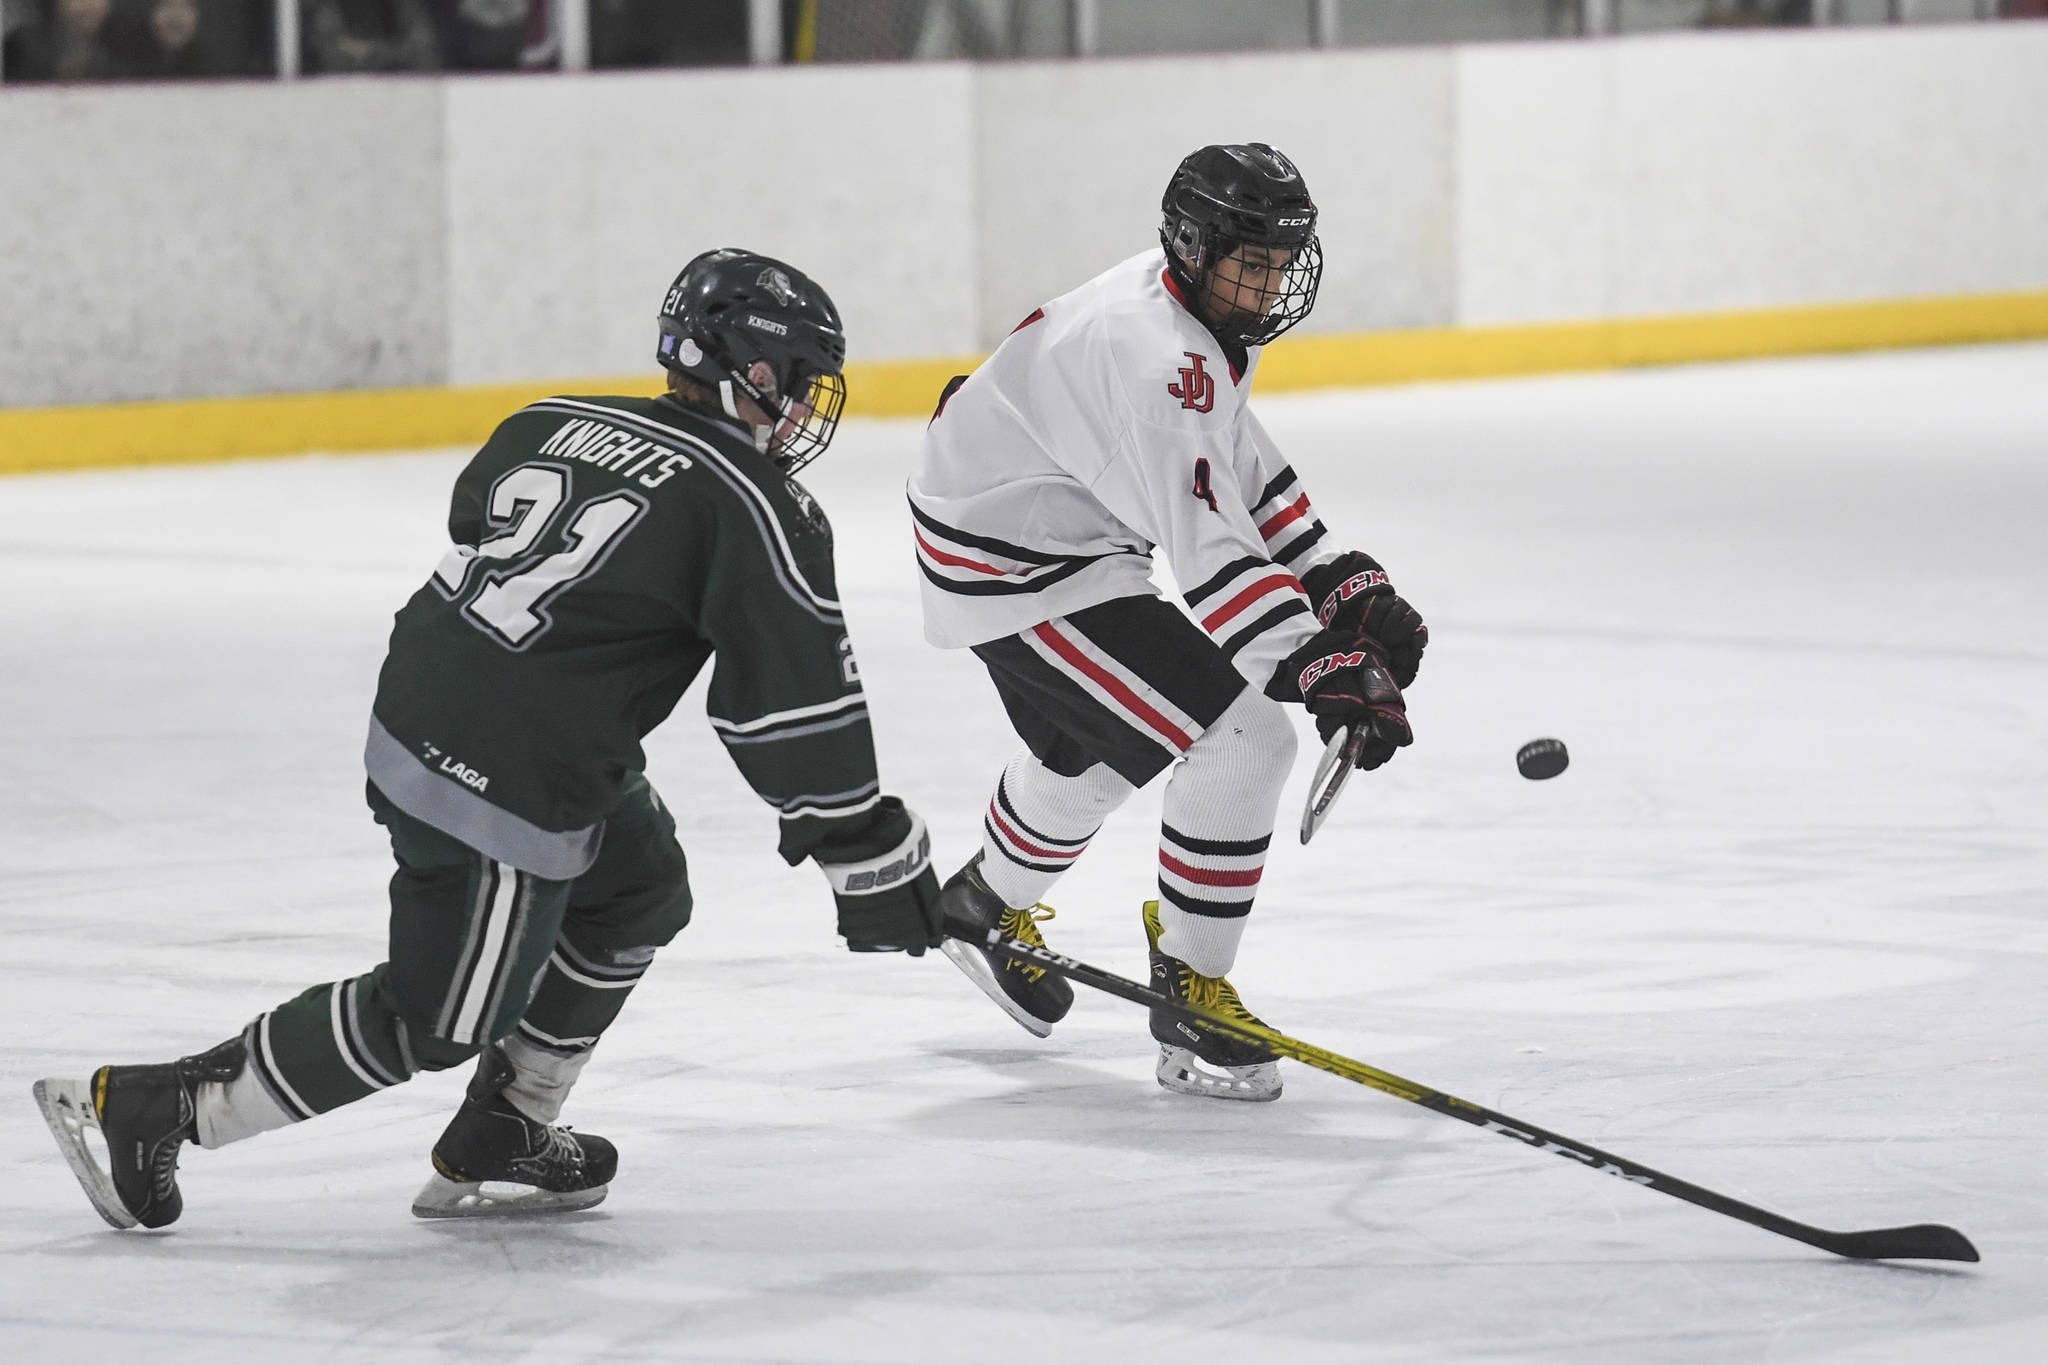 Juneau-Douglas’ Andre Peirovi, right, flicks the puck away from Colony’s Jacob Ross at Treadwell Arena on Friday, Nov. 22, 2019. (Michael Penn | Juneau Empire)